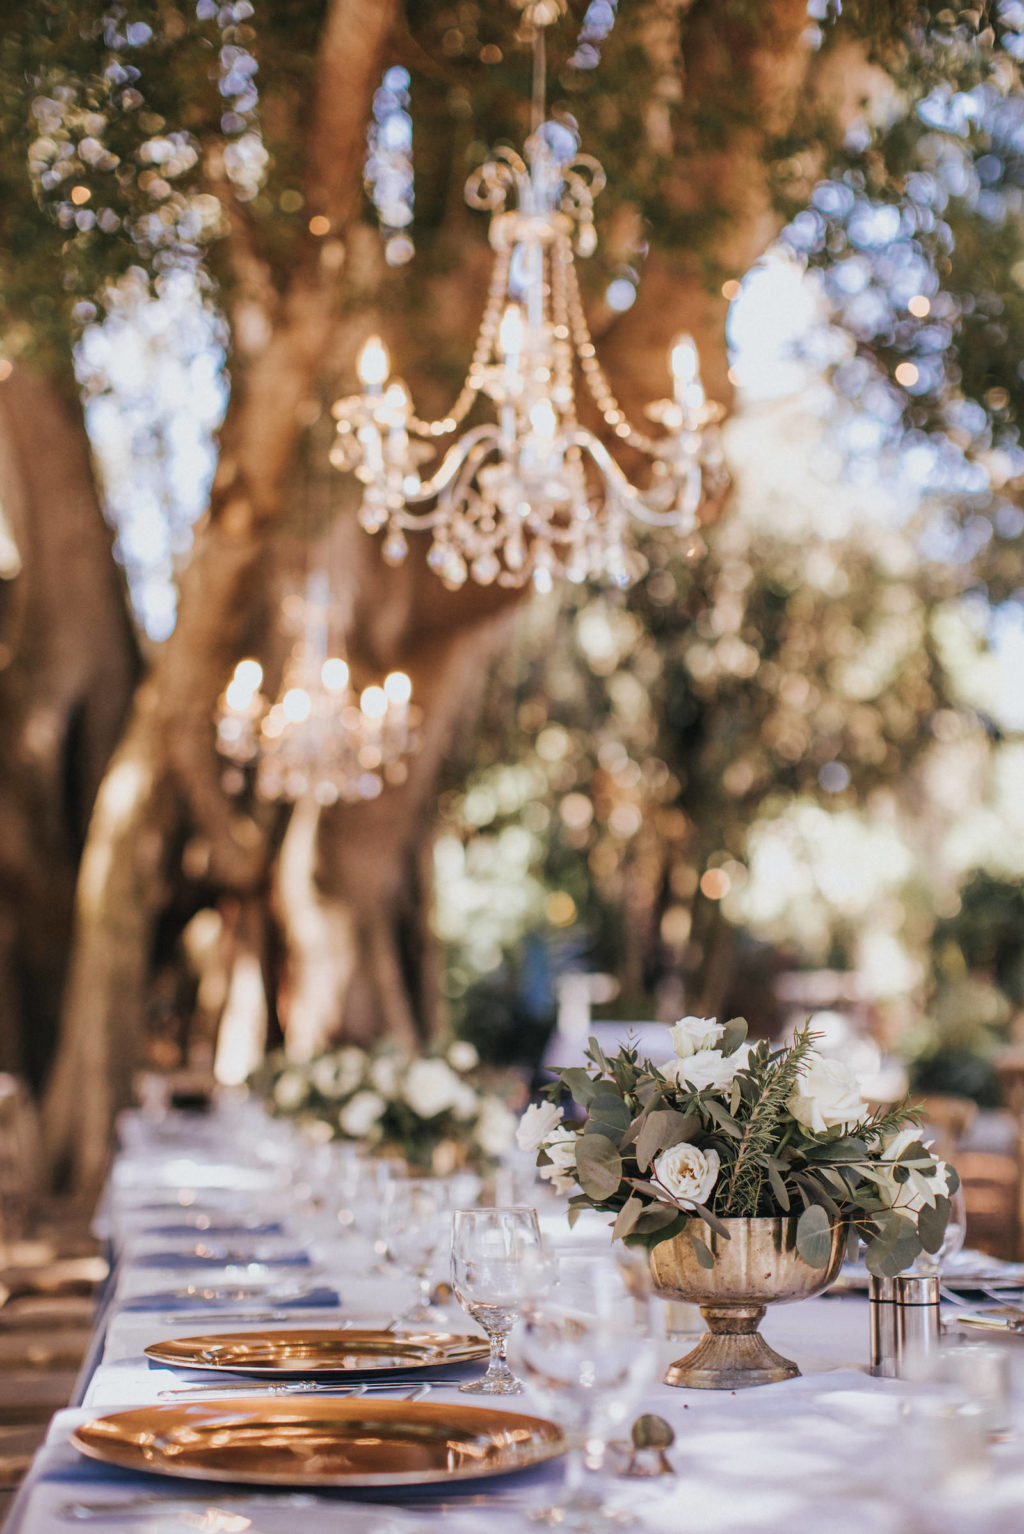 Romantic Rustic Outdoor Garden Wedding Reception | Sarasota Marie Selby Botanical Gardens | Gold Chargers and French Country Wooden Reception Chairs | Crystal Chandeliers Hanging from Trees | Sarasota Wedding Planner Taylored Affairs